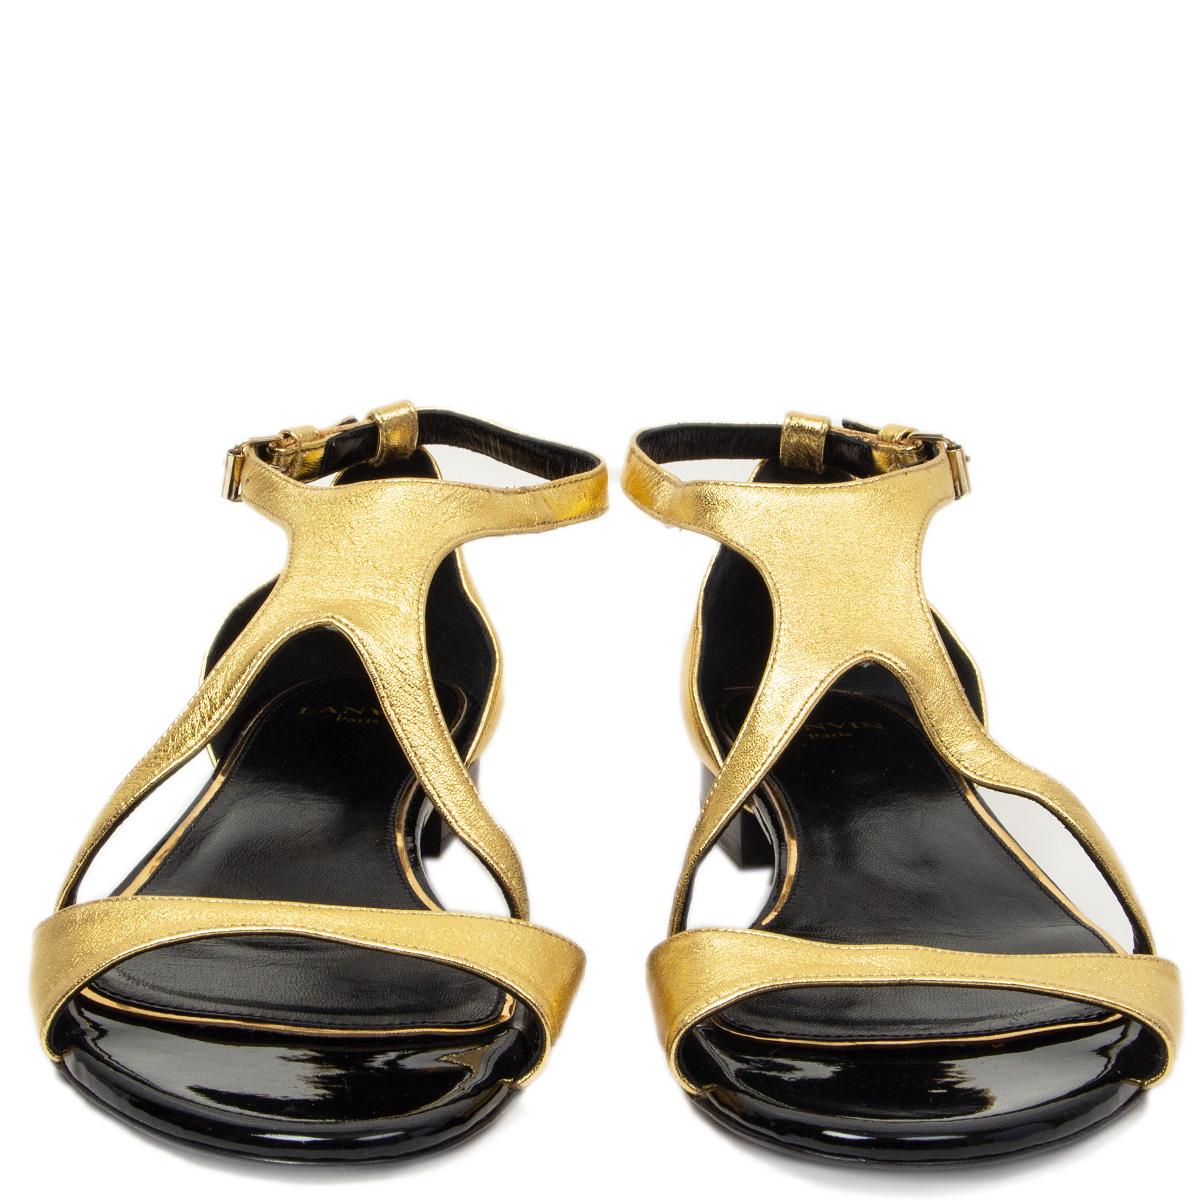 100% authentic Lanvin ankle strap flat sandals in metallic gold-tone leather and a black patent leather toe. Have been worn once inside and are in virtually new condition.  

Measurements
Imprinted Size	39
Shoe Size	39
Inside Sole	25.5cm